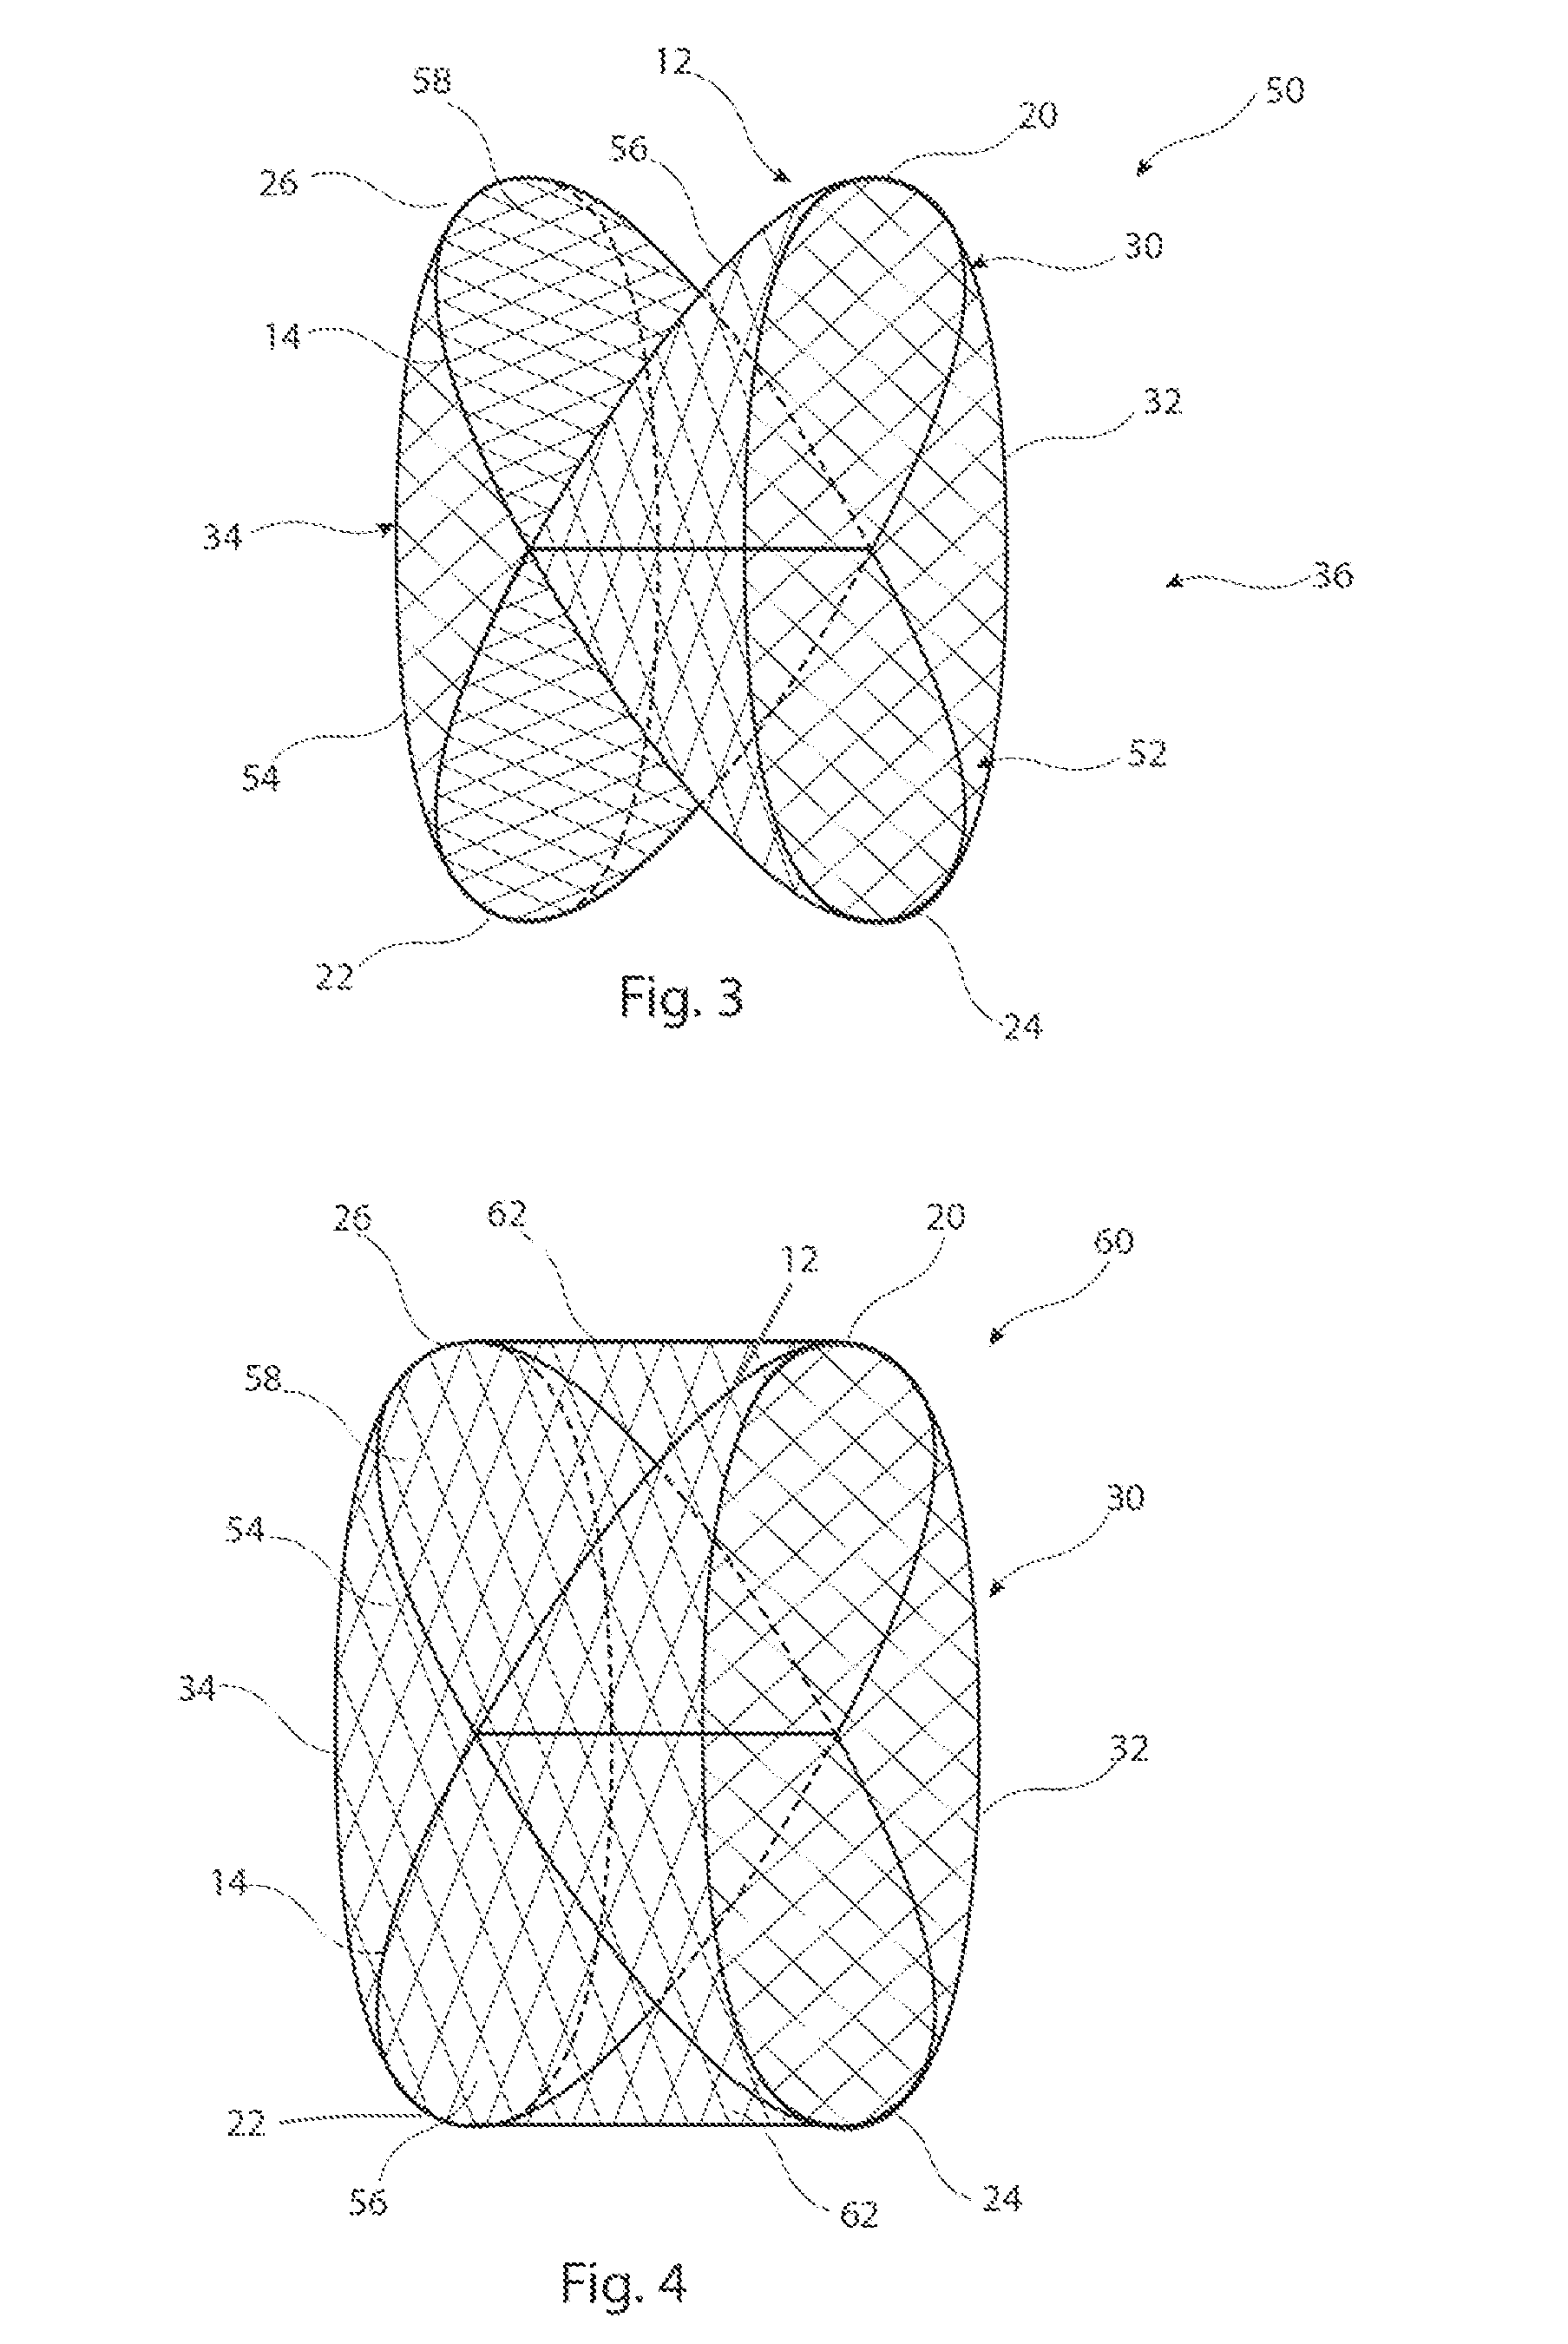 Vascular occluder with crossing frame elements